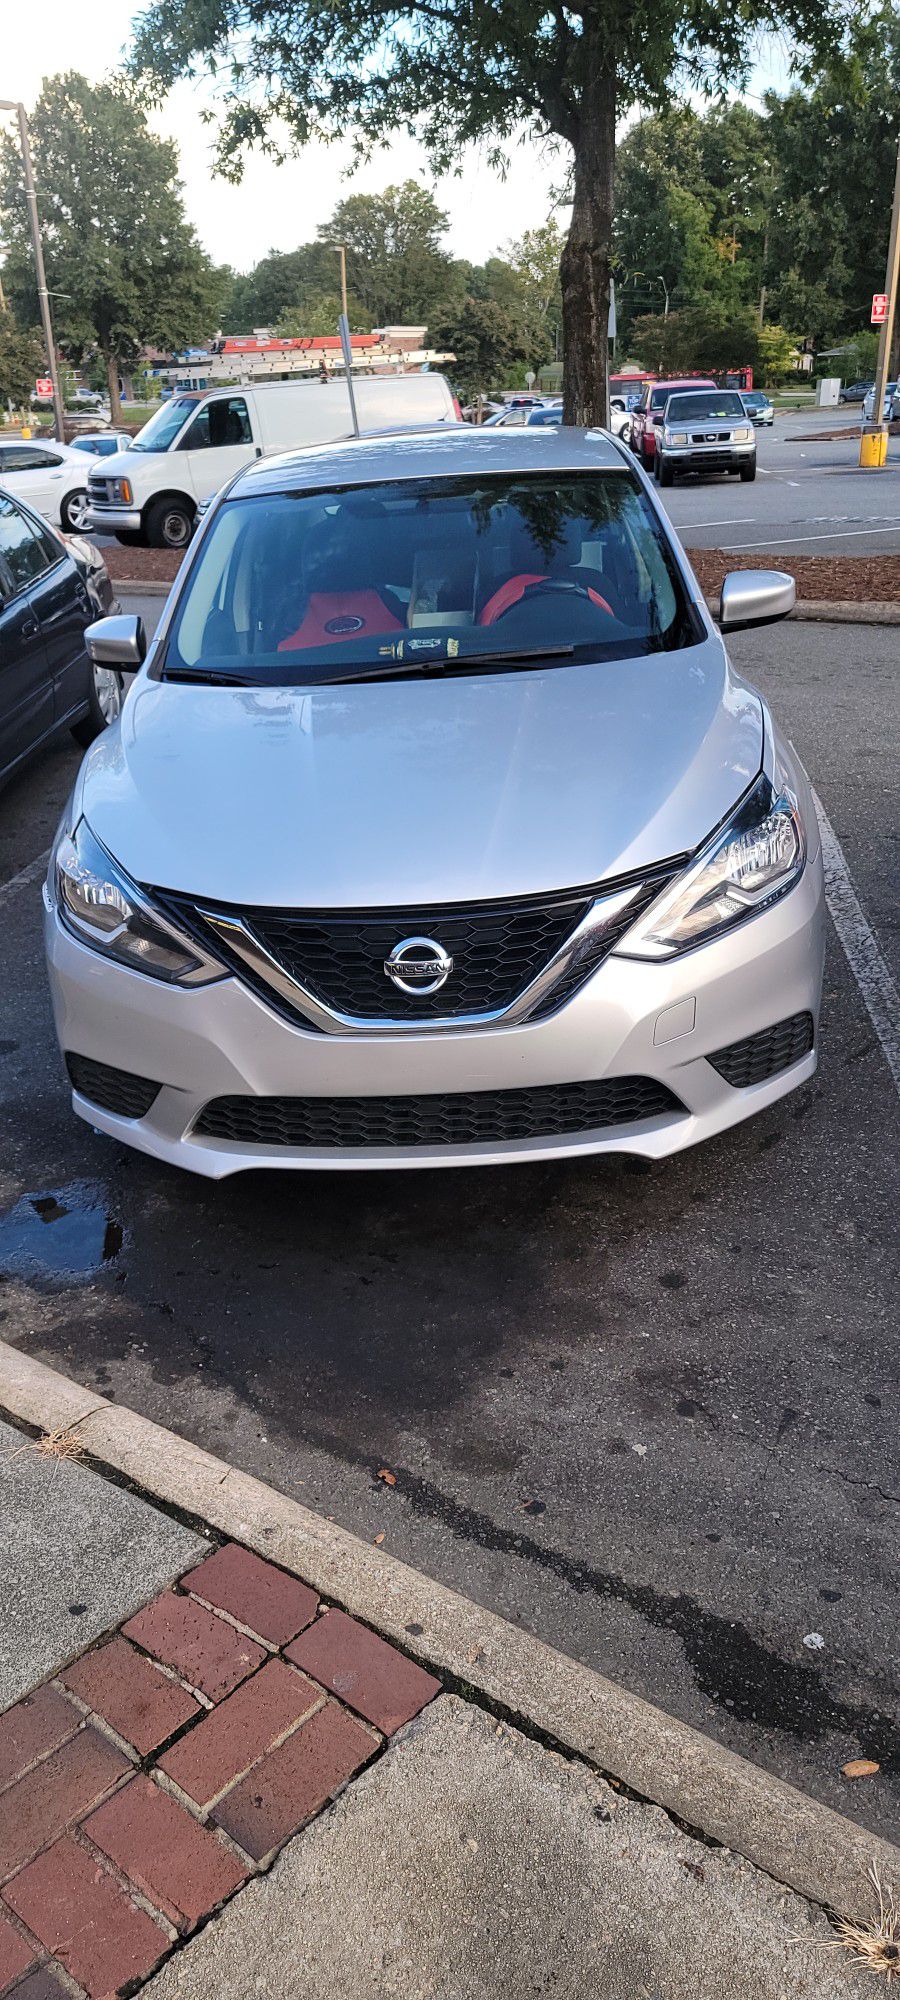 2016 nissan sentra, 4 cylinders, in perfect condition 95k miles with inspection until September 2022